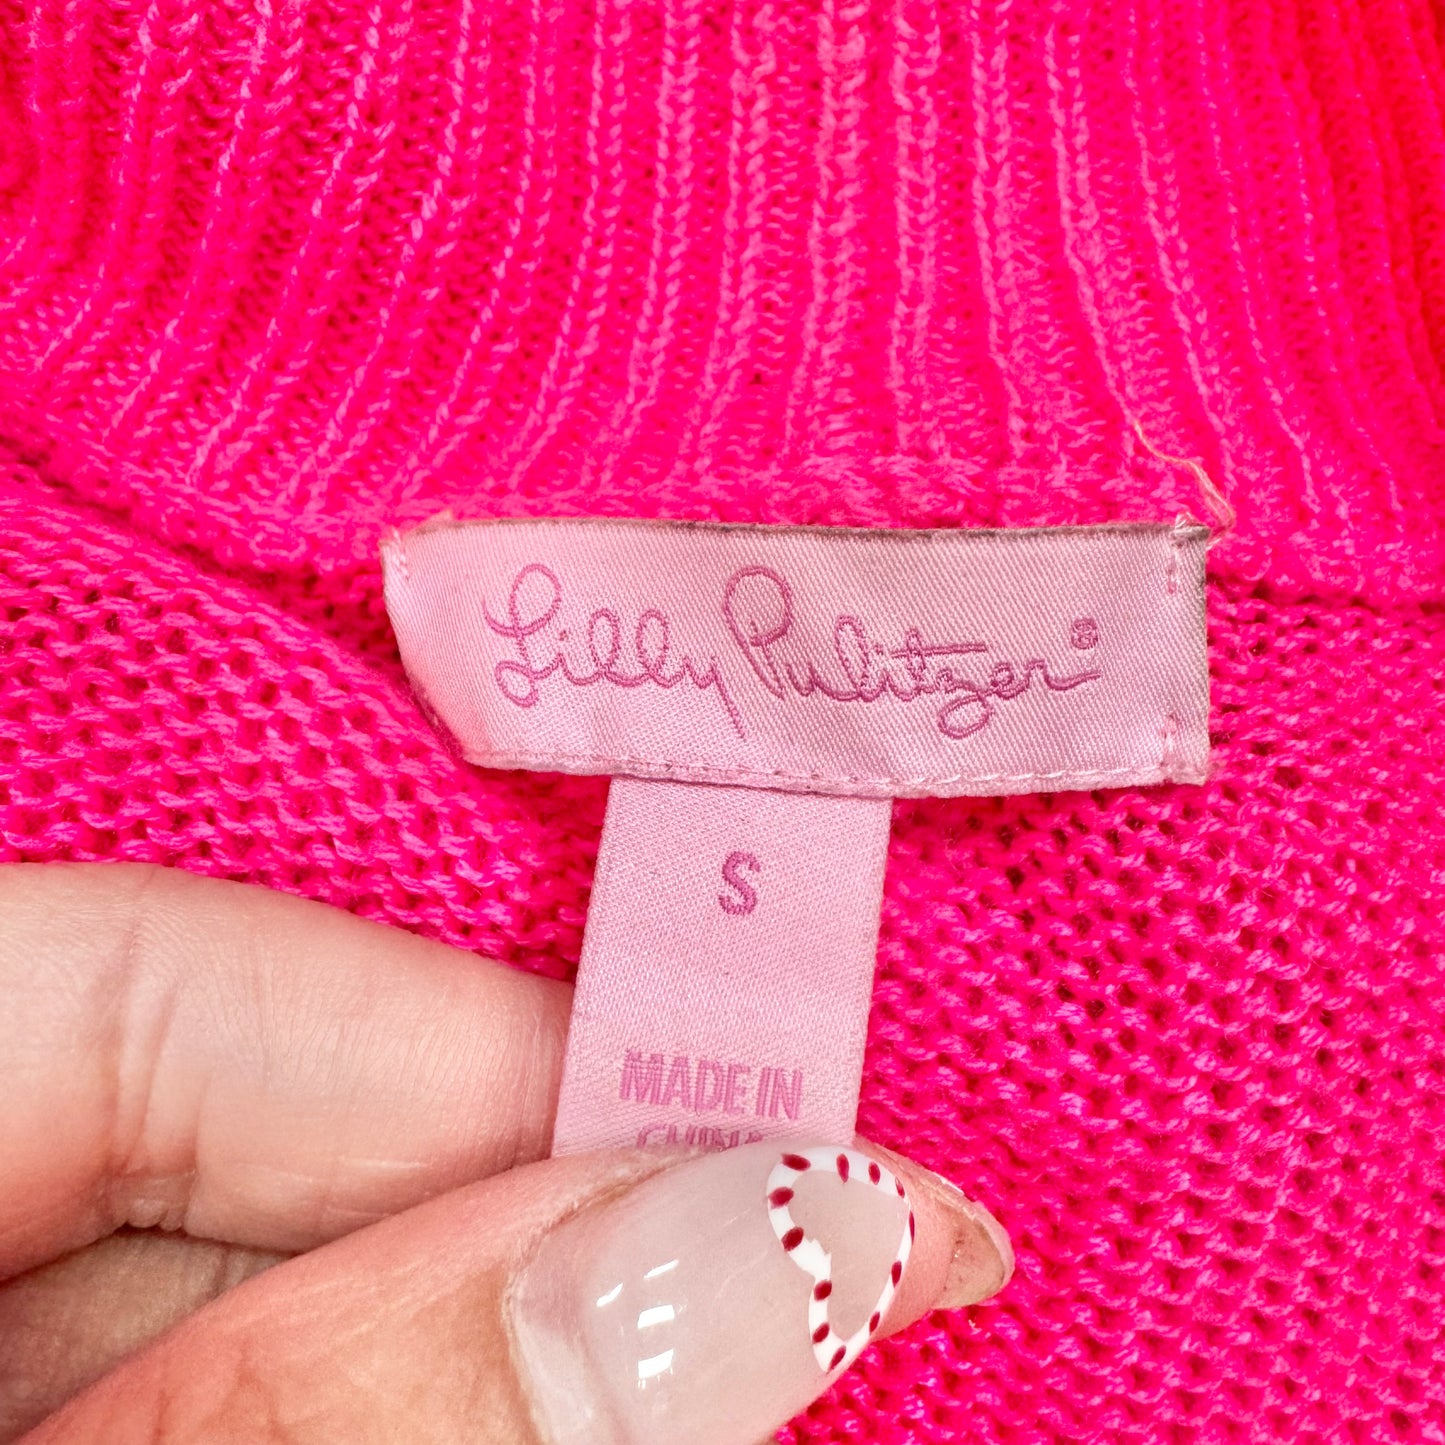 Sweater Designer By Lilly Pulitzer  Size: S